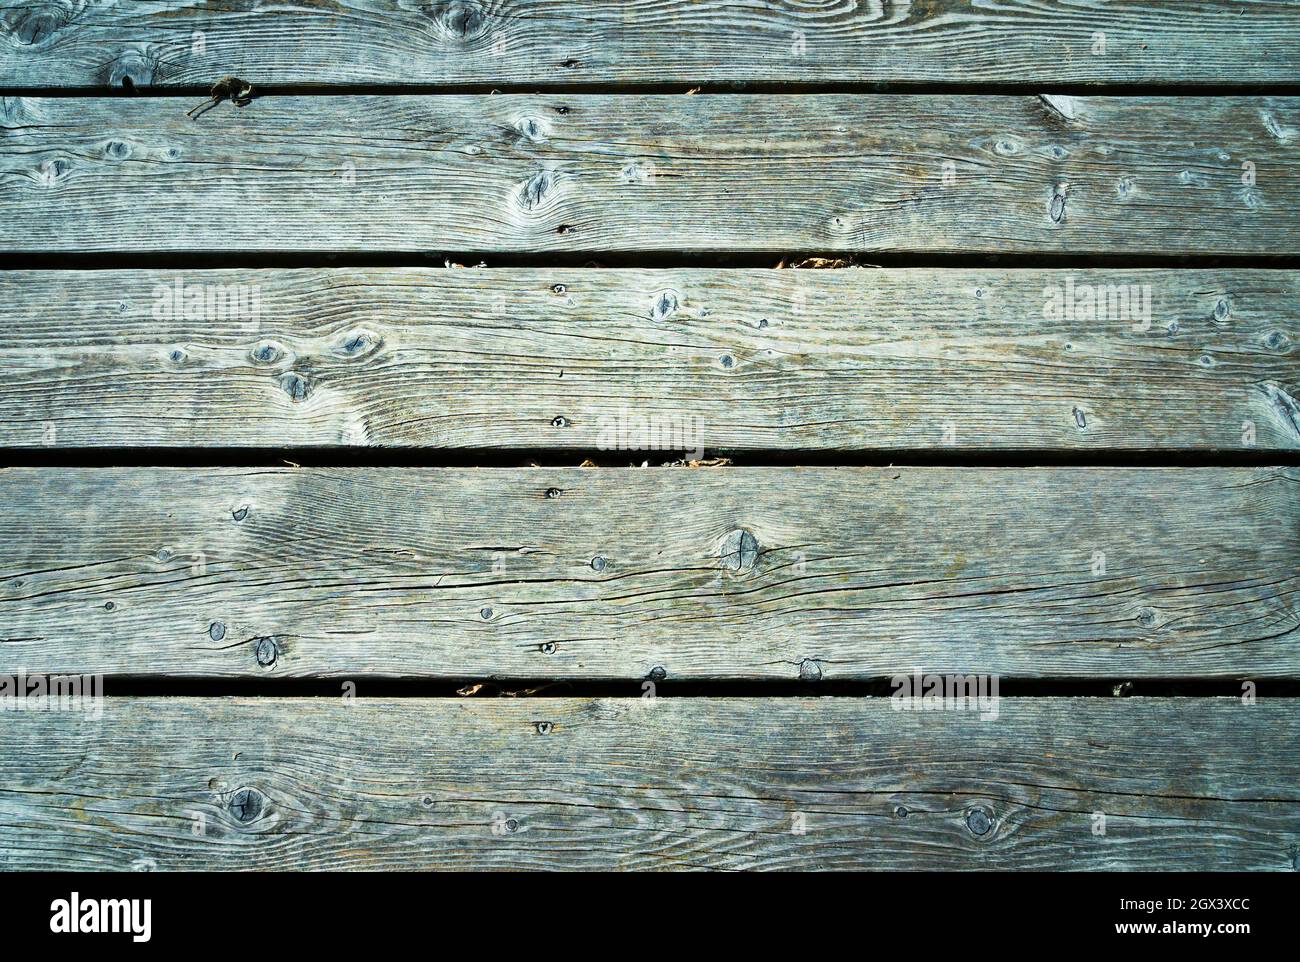 Old wooden planks with bluish tones and lots of texture placed horizontally. Stock Photo